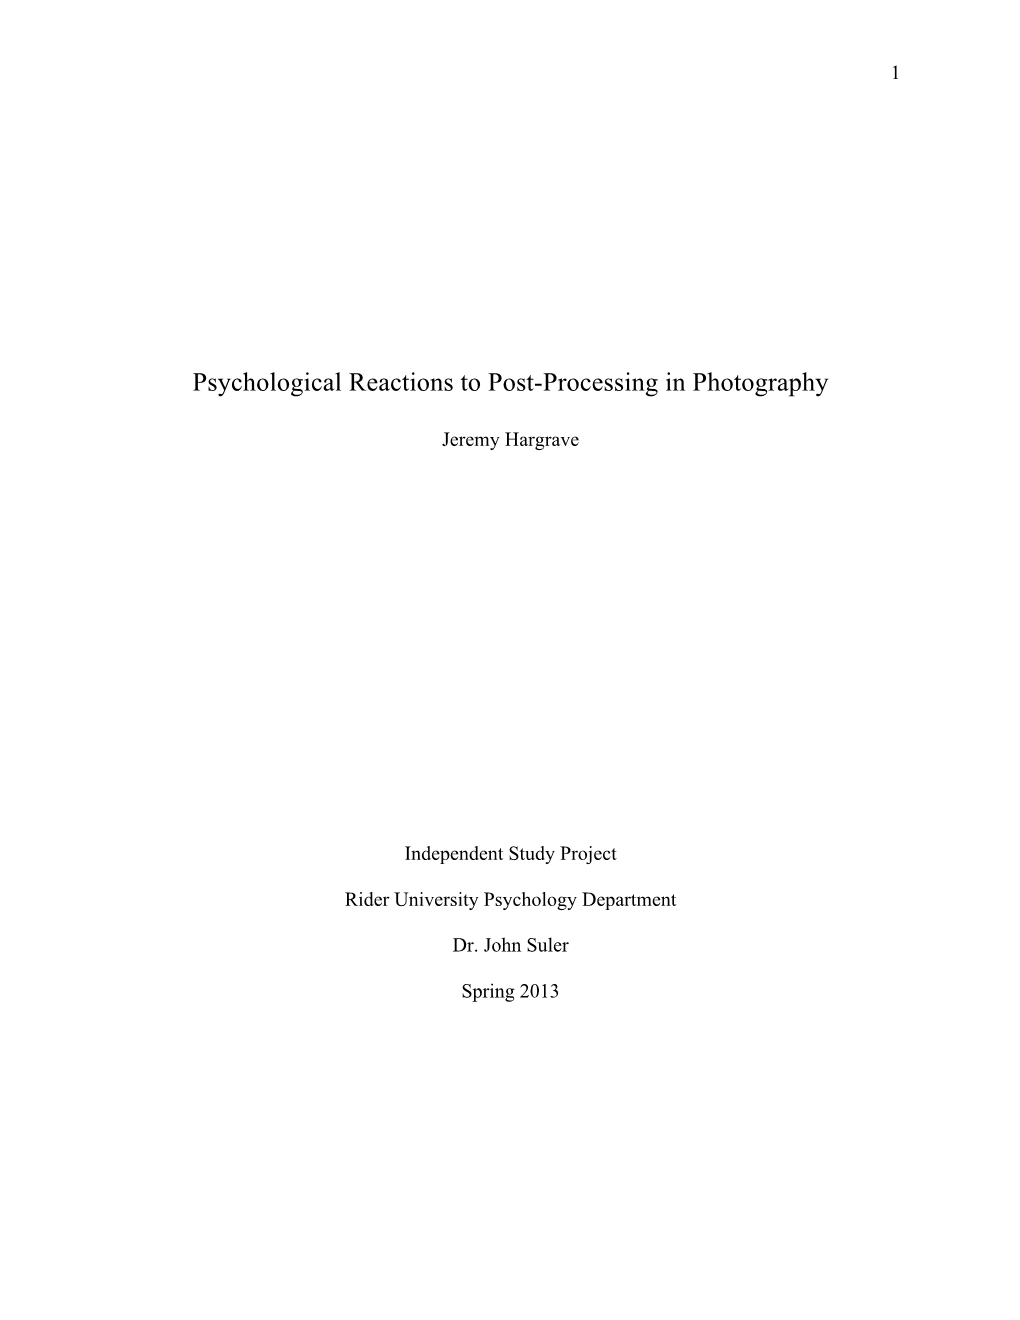 Psychological Reactions to Post-Processing in Photography